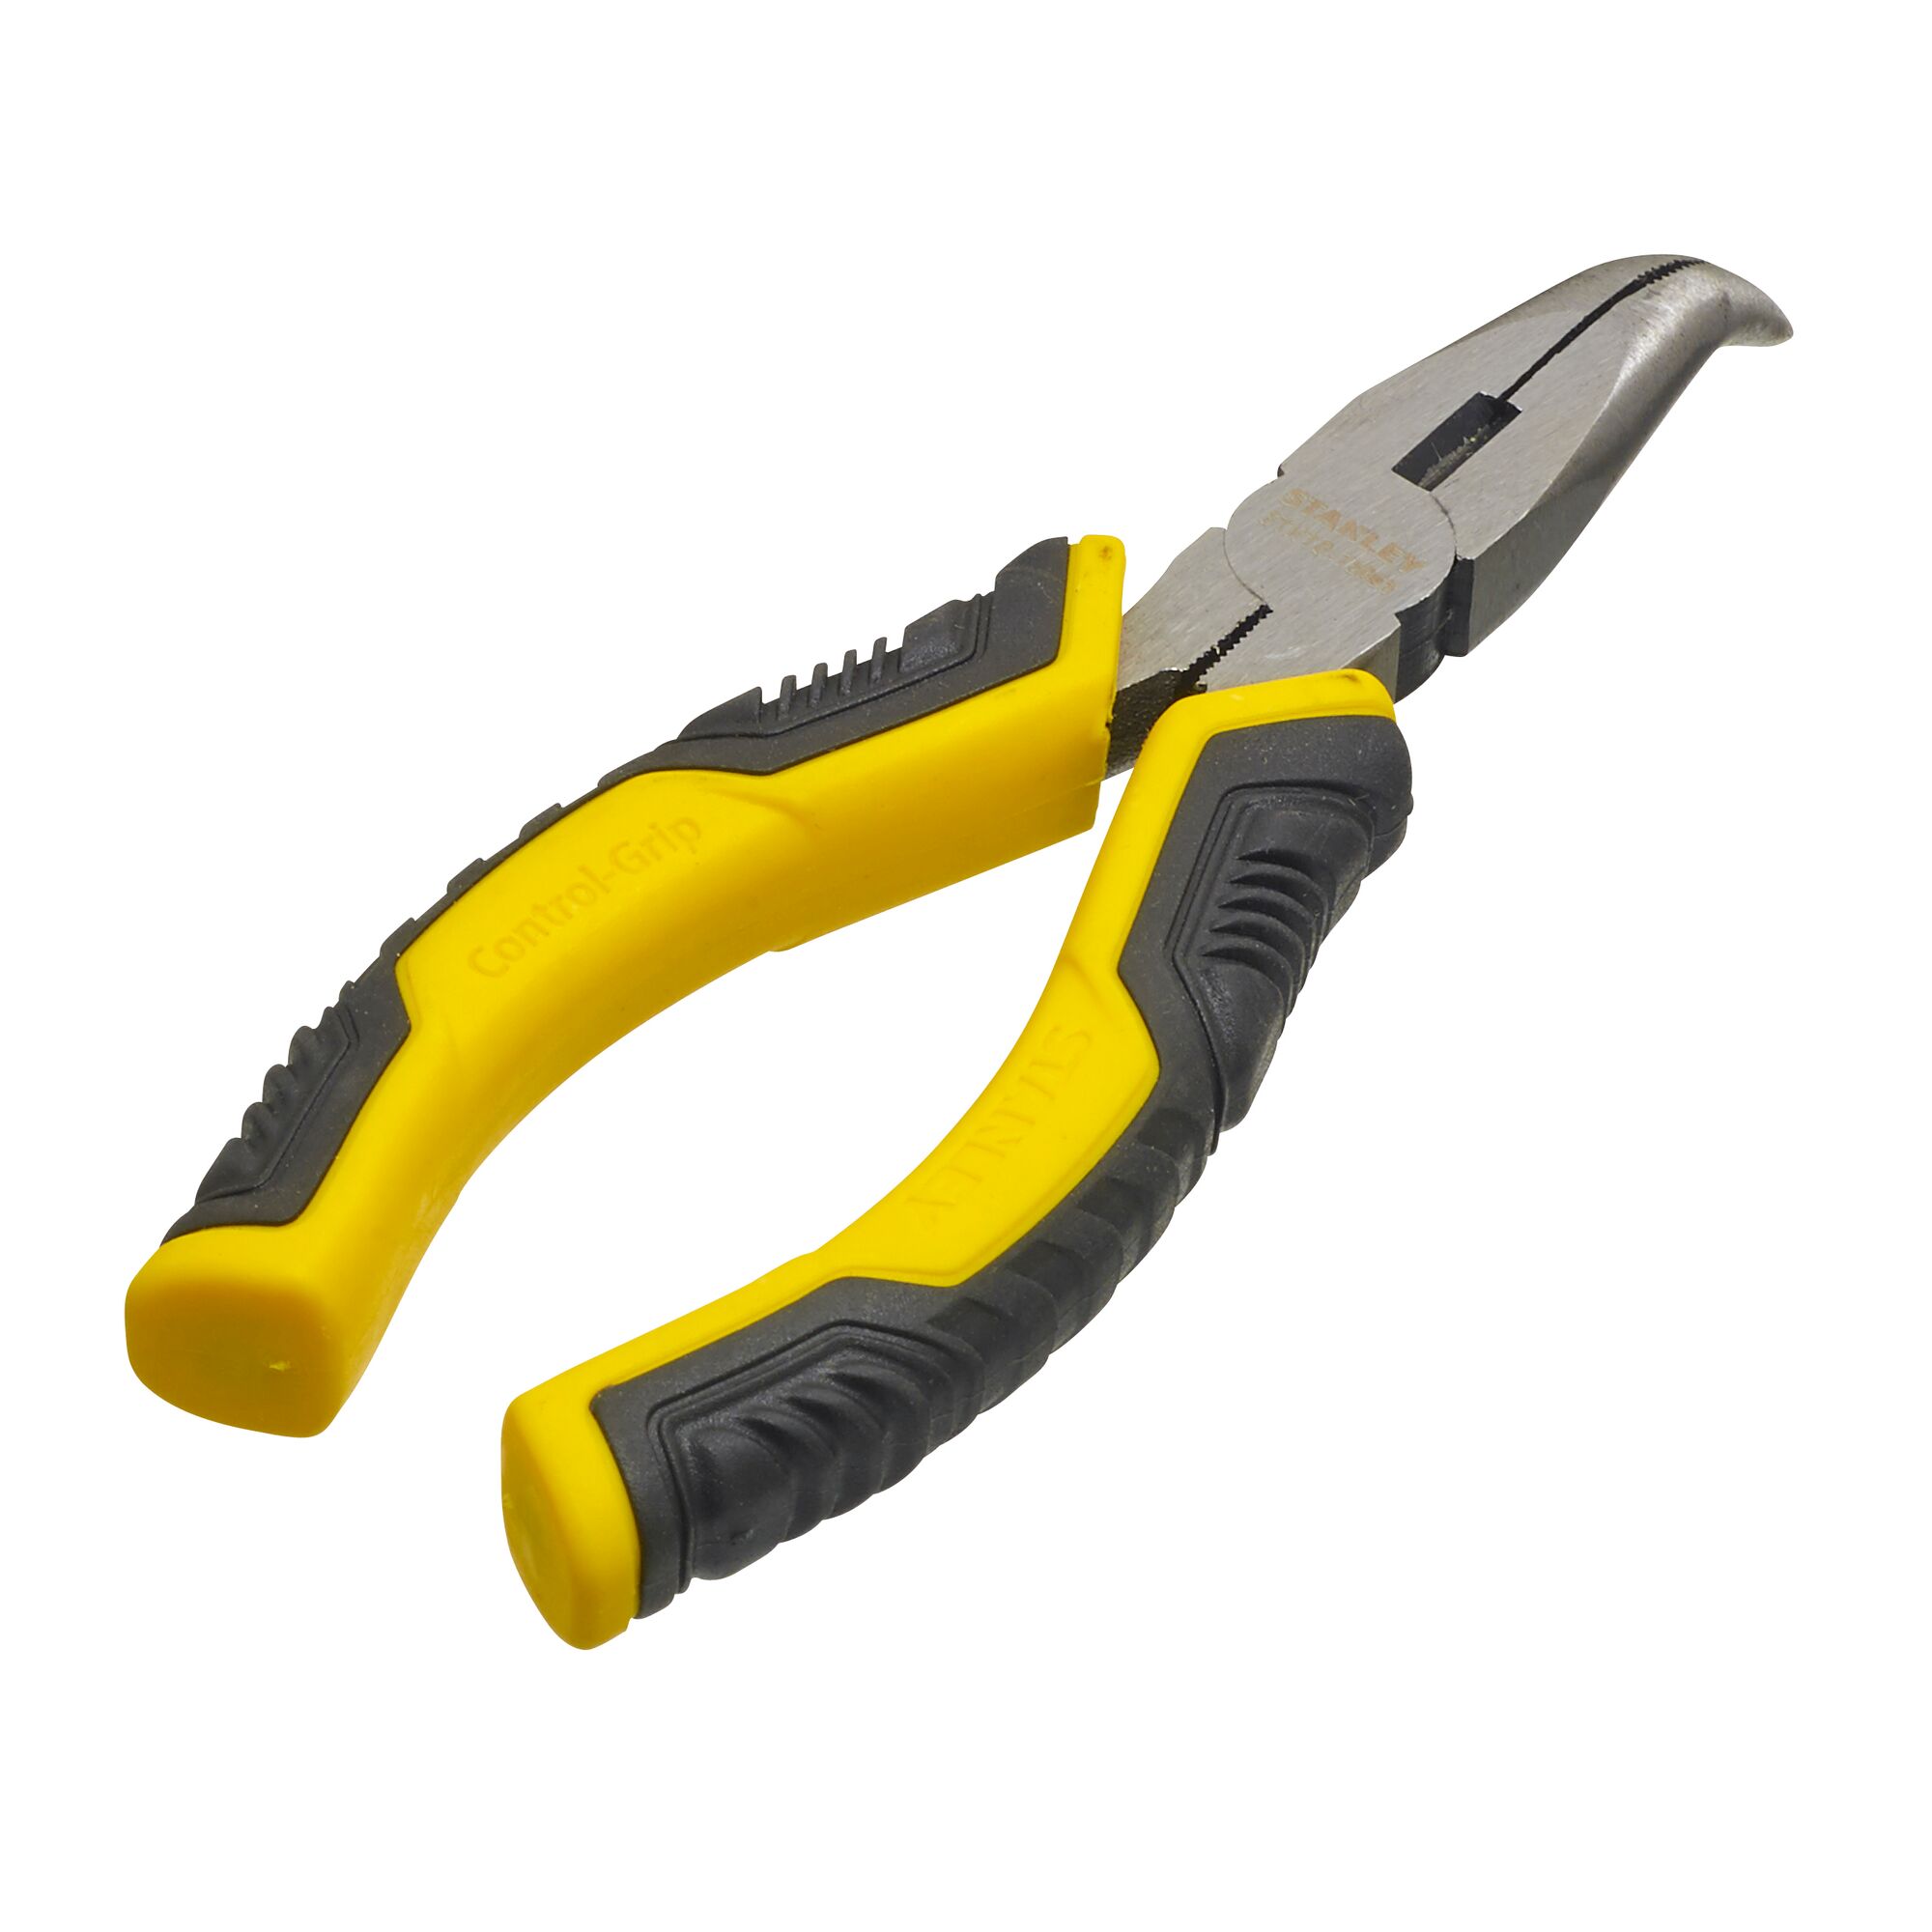 Combination Control Grip Pliers 150mm Stanley DynaGrip STHT0 74456 